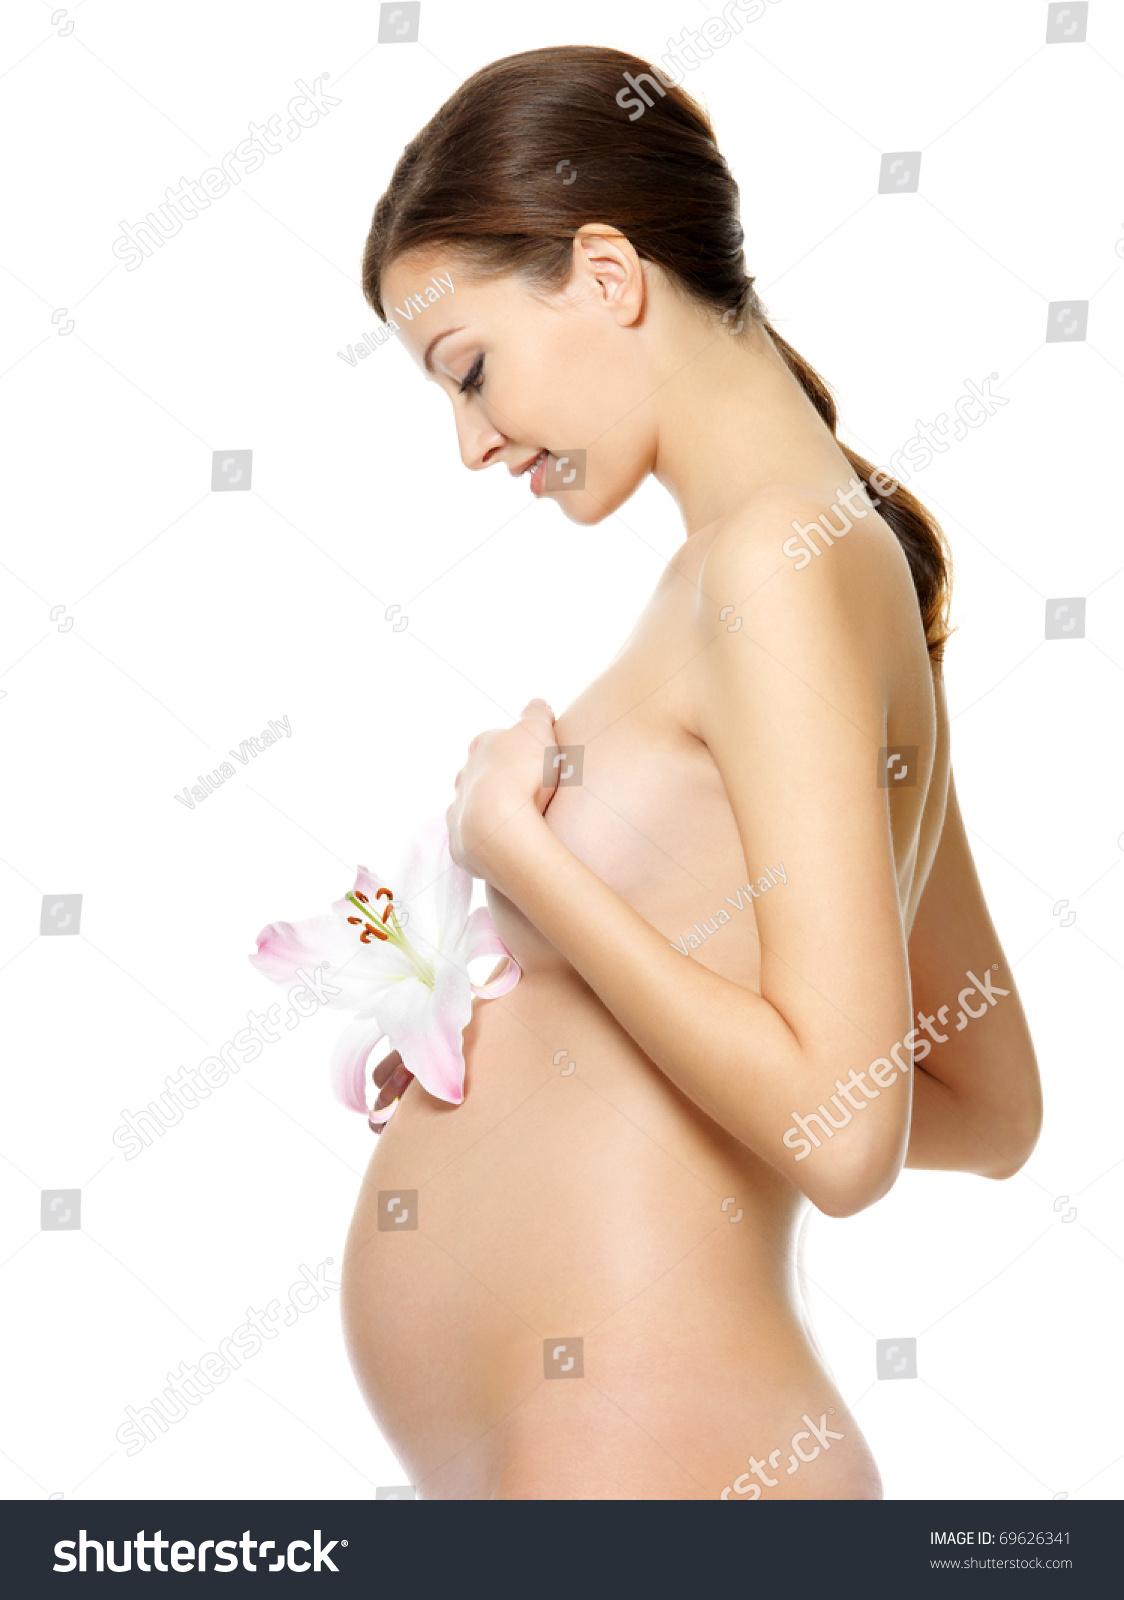 Nude Pregnant Woman Sex 2